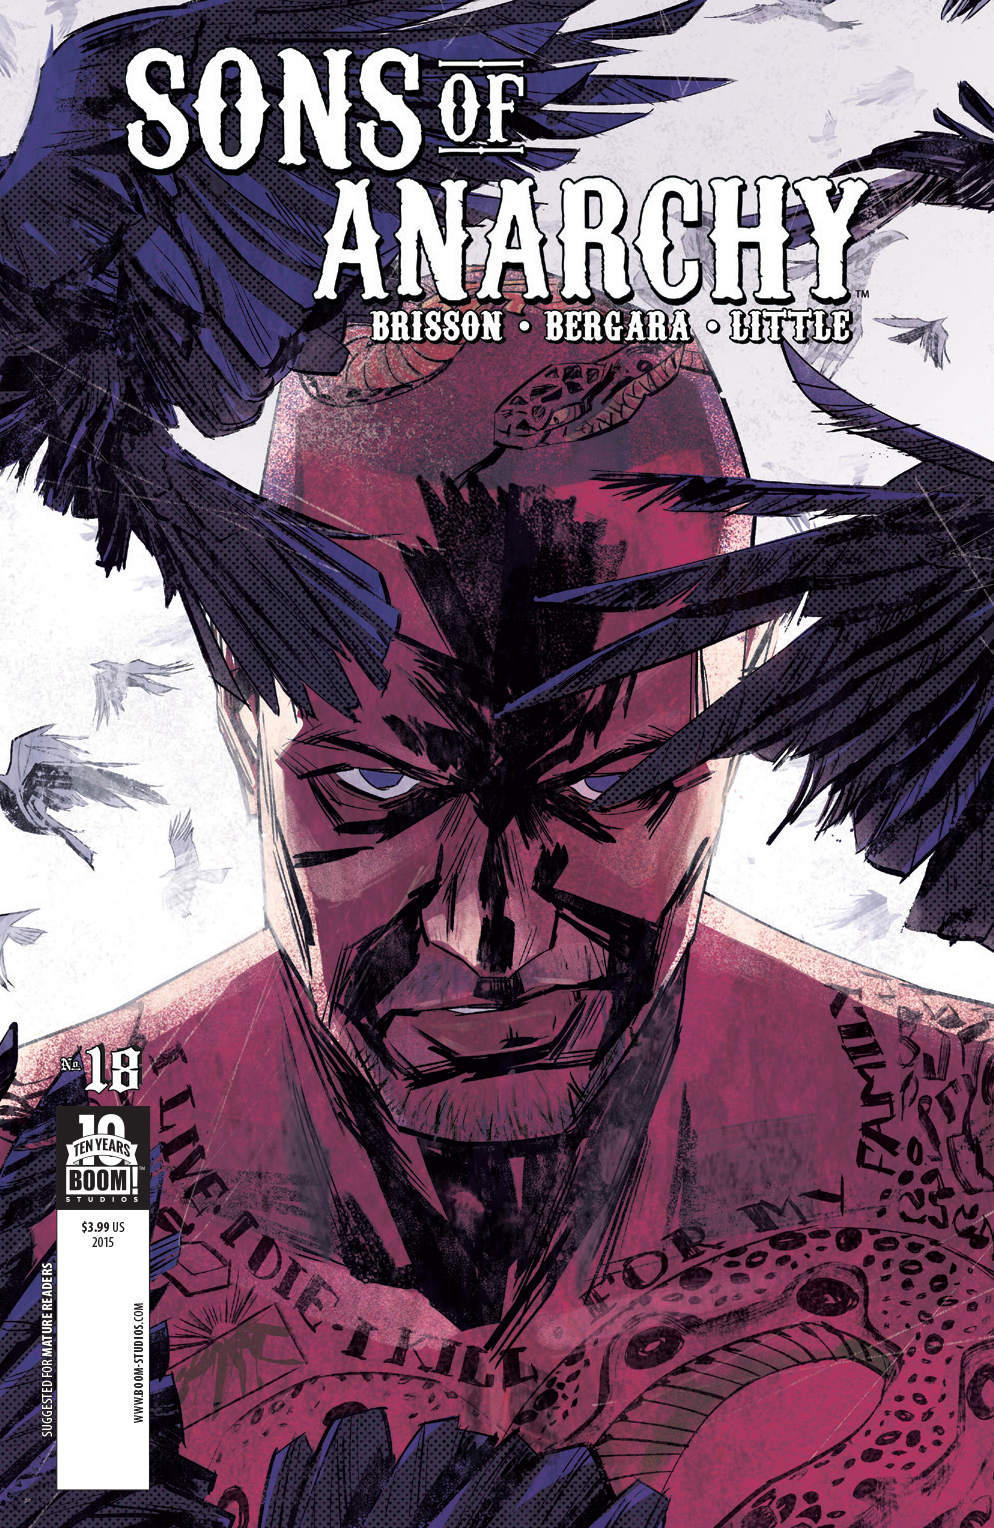 SONS OF ANARCHY #18 (MR)